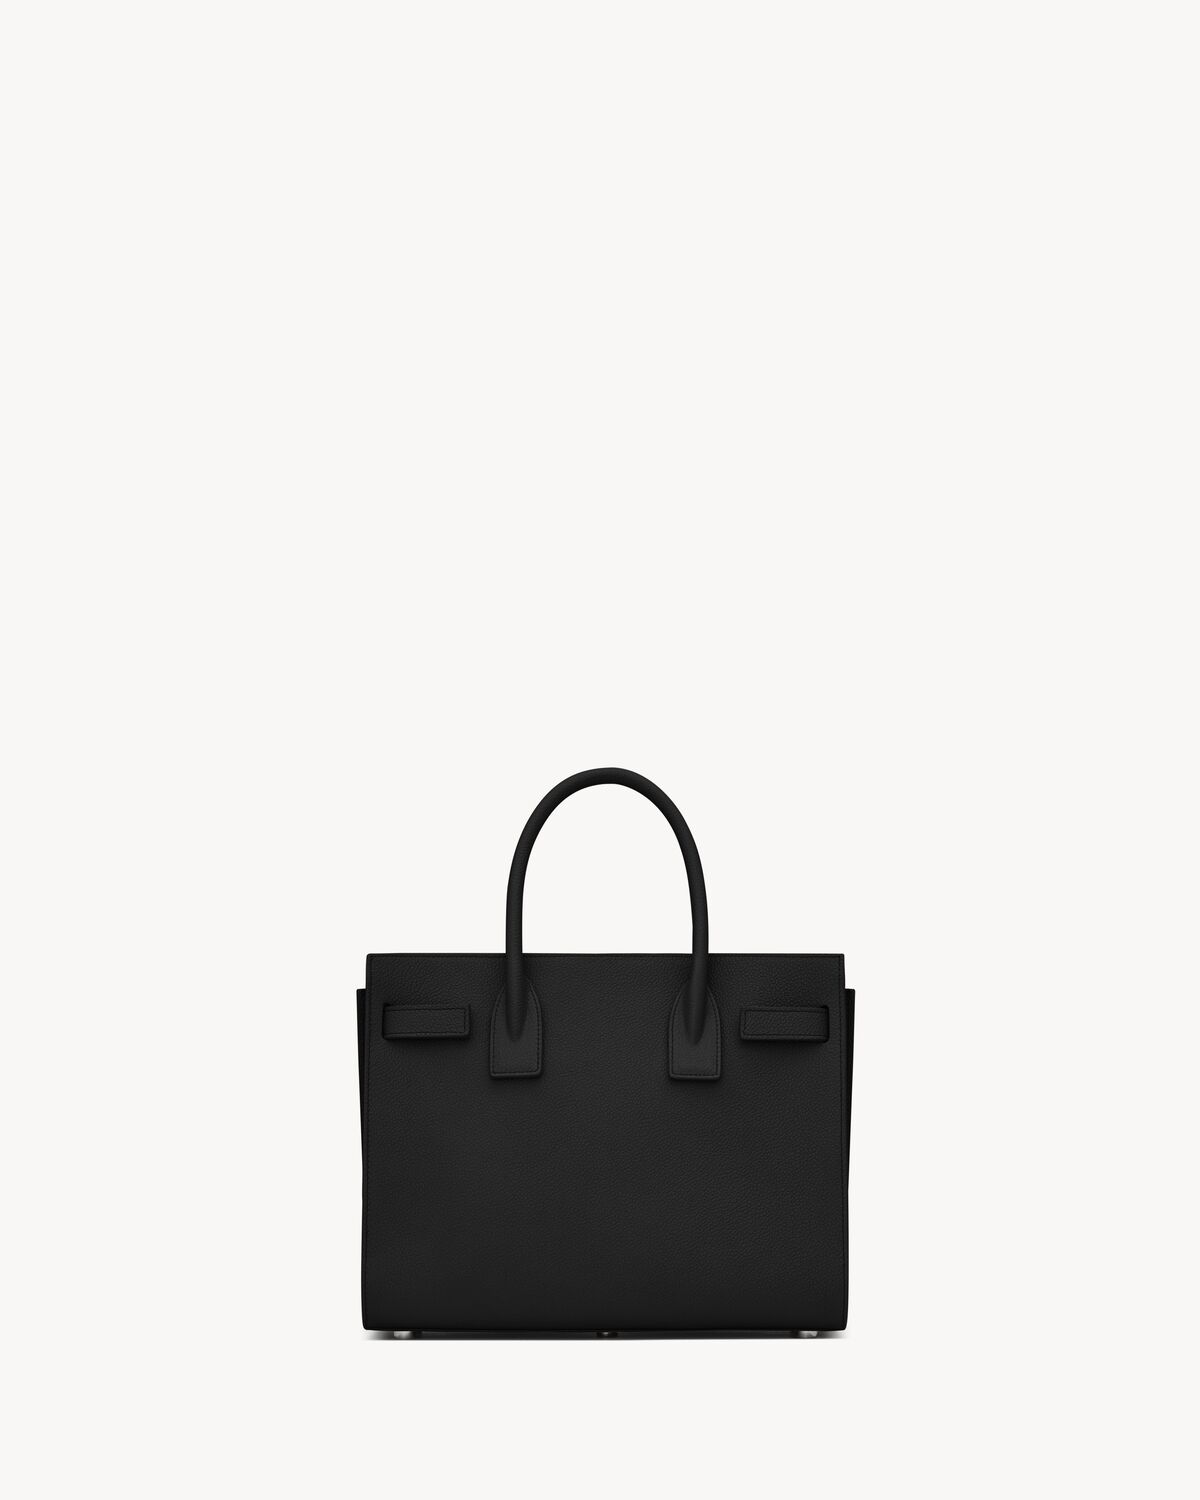 SAC DE JOUR BABY IN GRAINED LEATHER